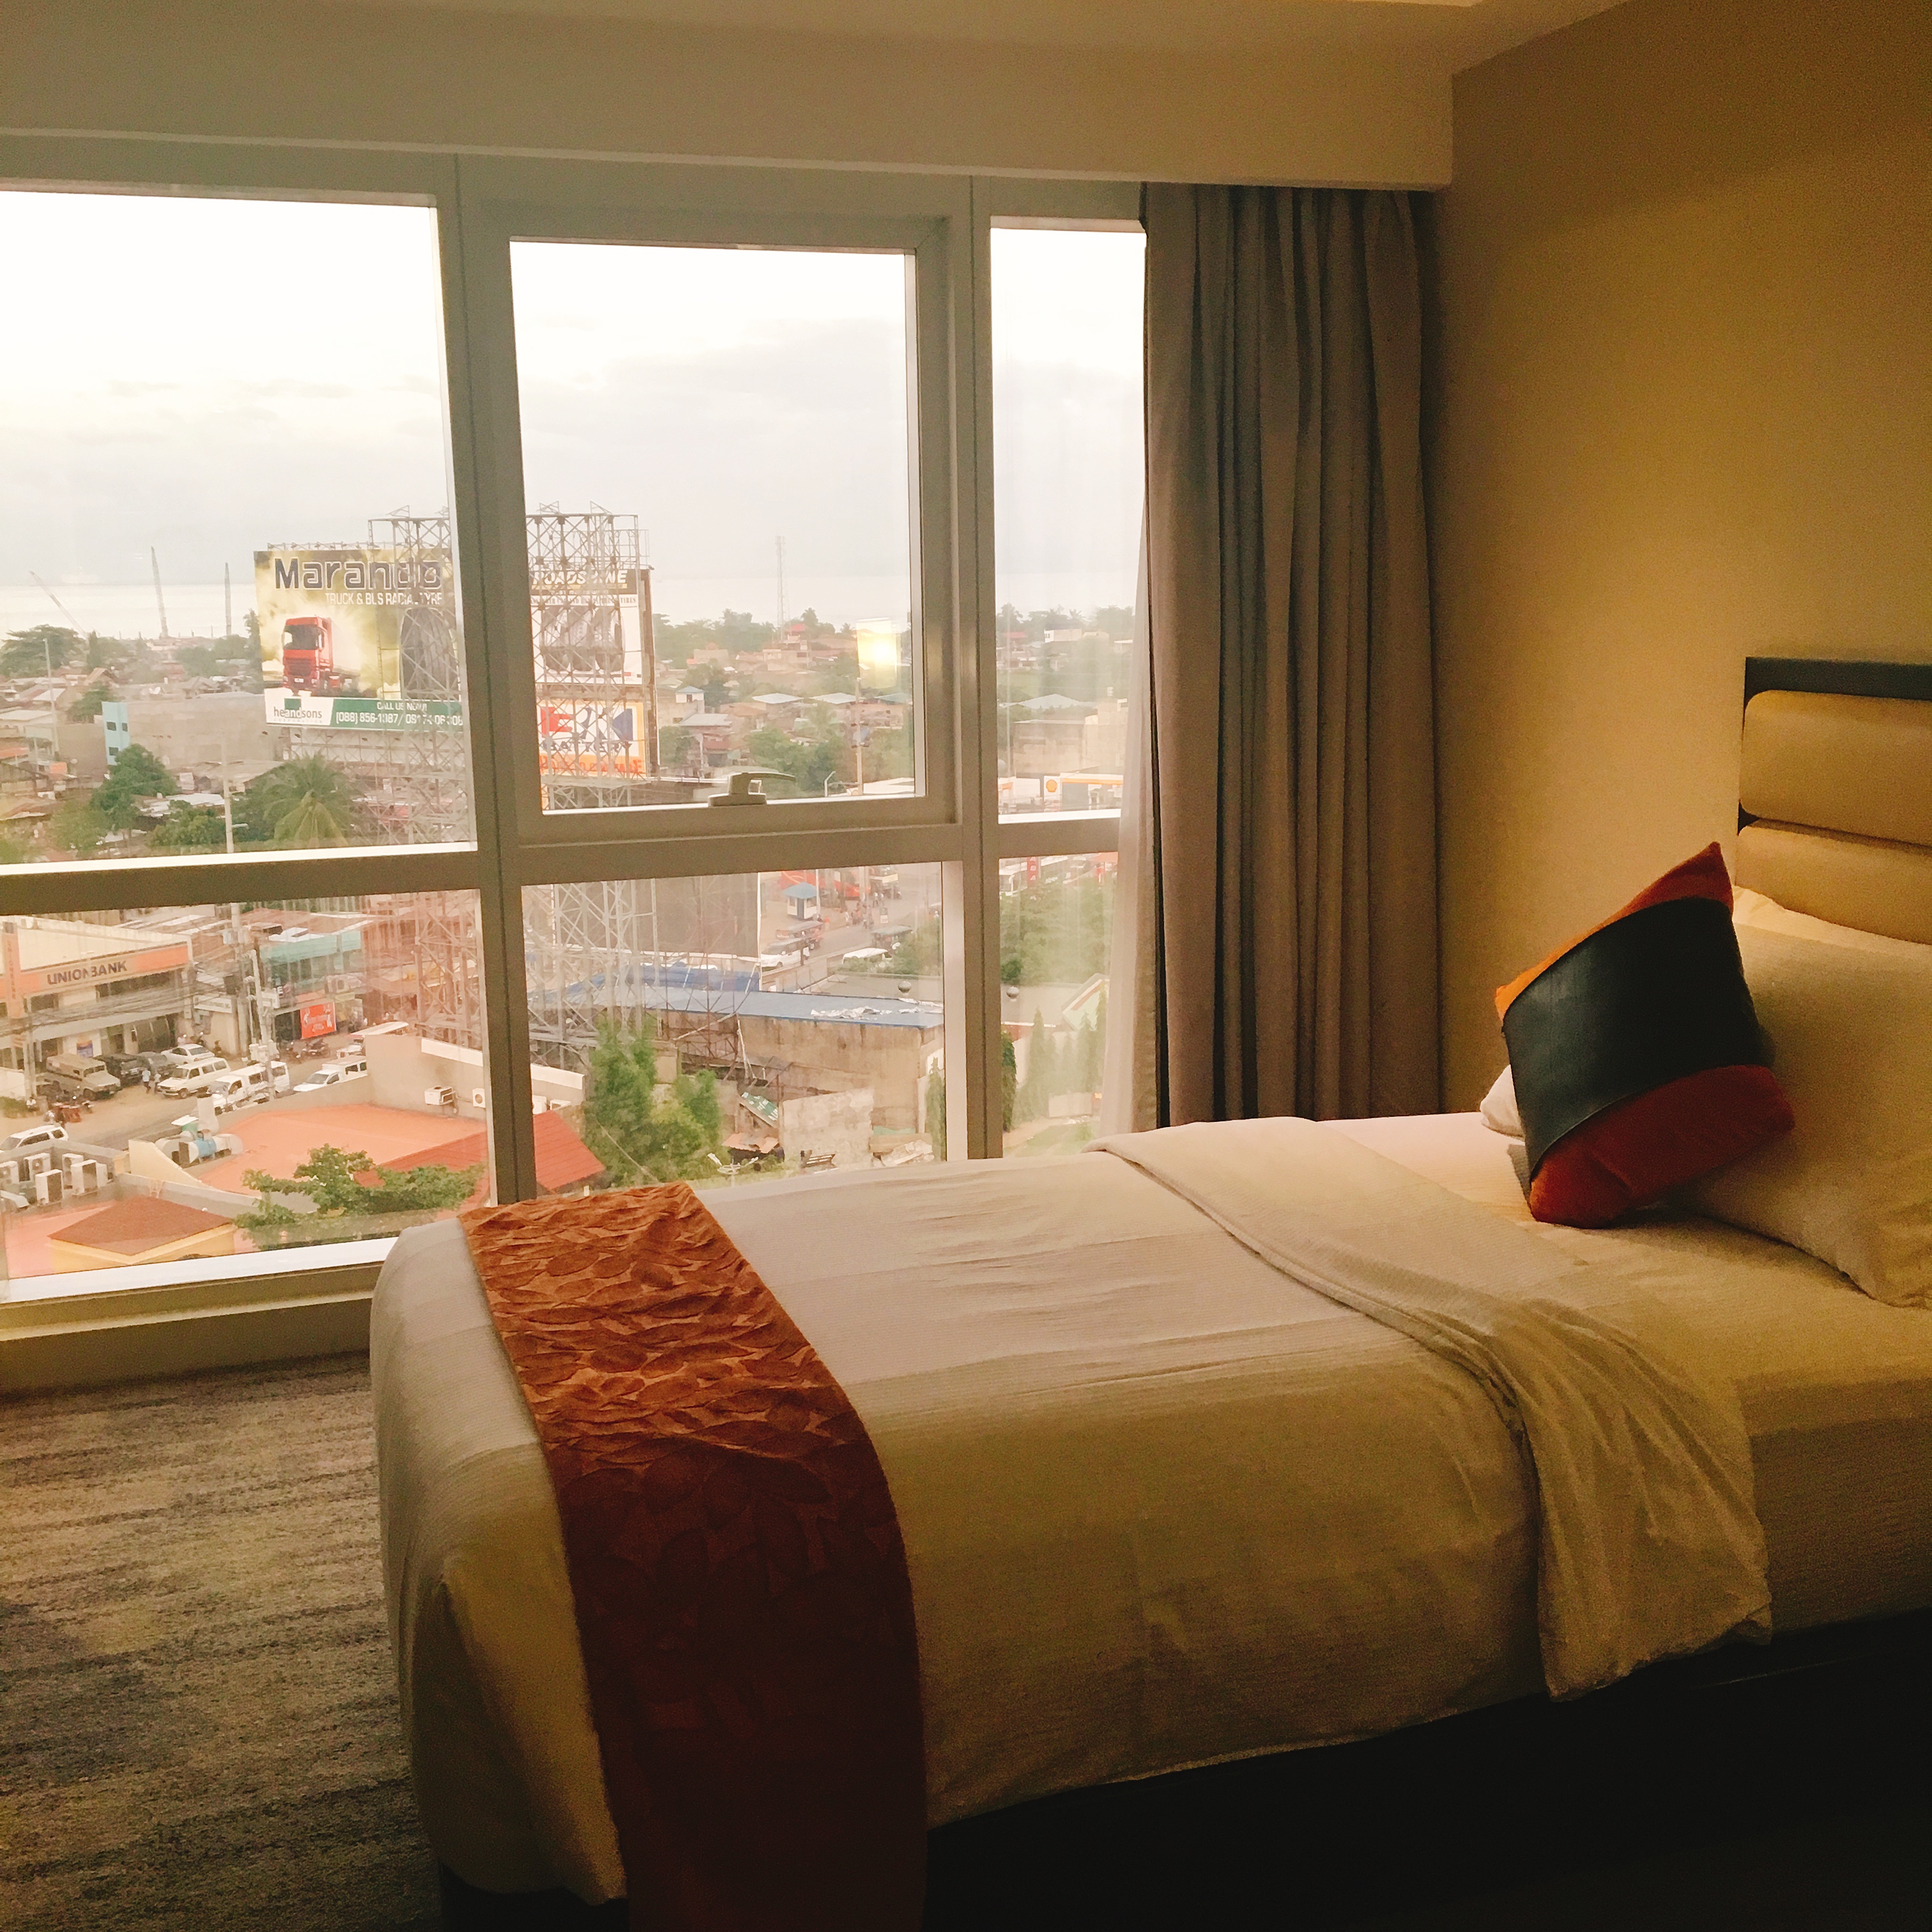 Tried and tested: How I saved big on my CDO hotel with the Traveloka App